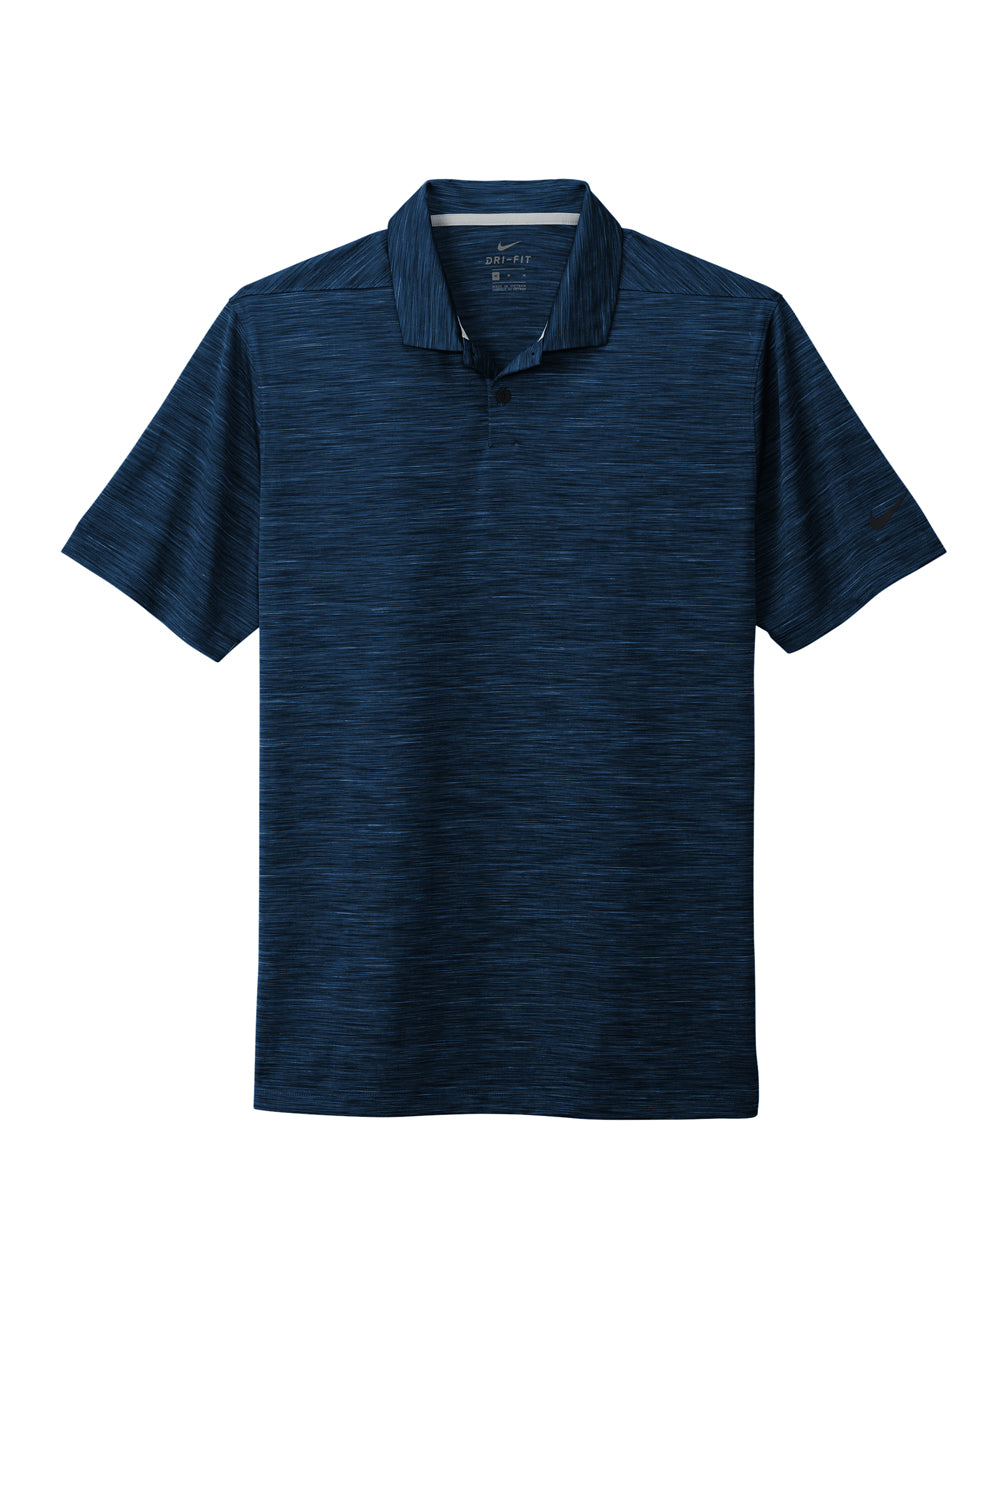 Nike NKDC2109 Mens Vapor Space Dyed Dri-Fit Moisture Wicking Short Sleeve Polo Shirt Navy Blue Flat Front